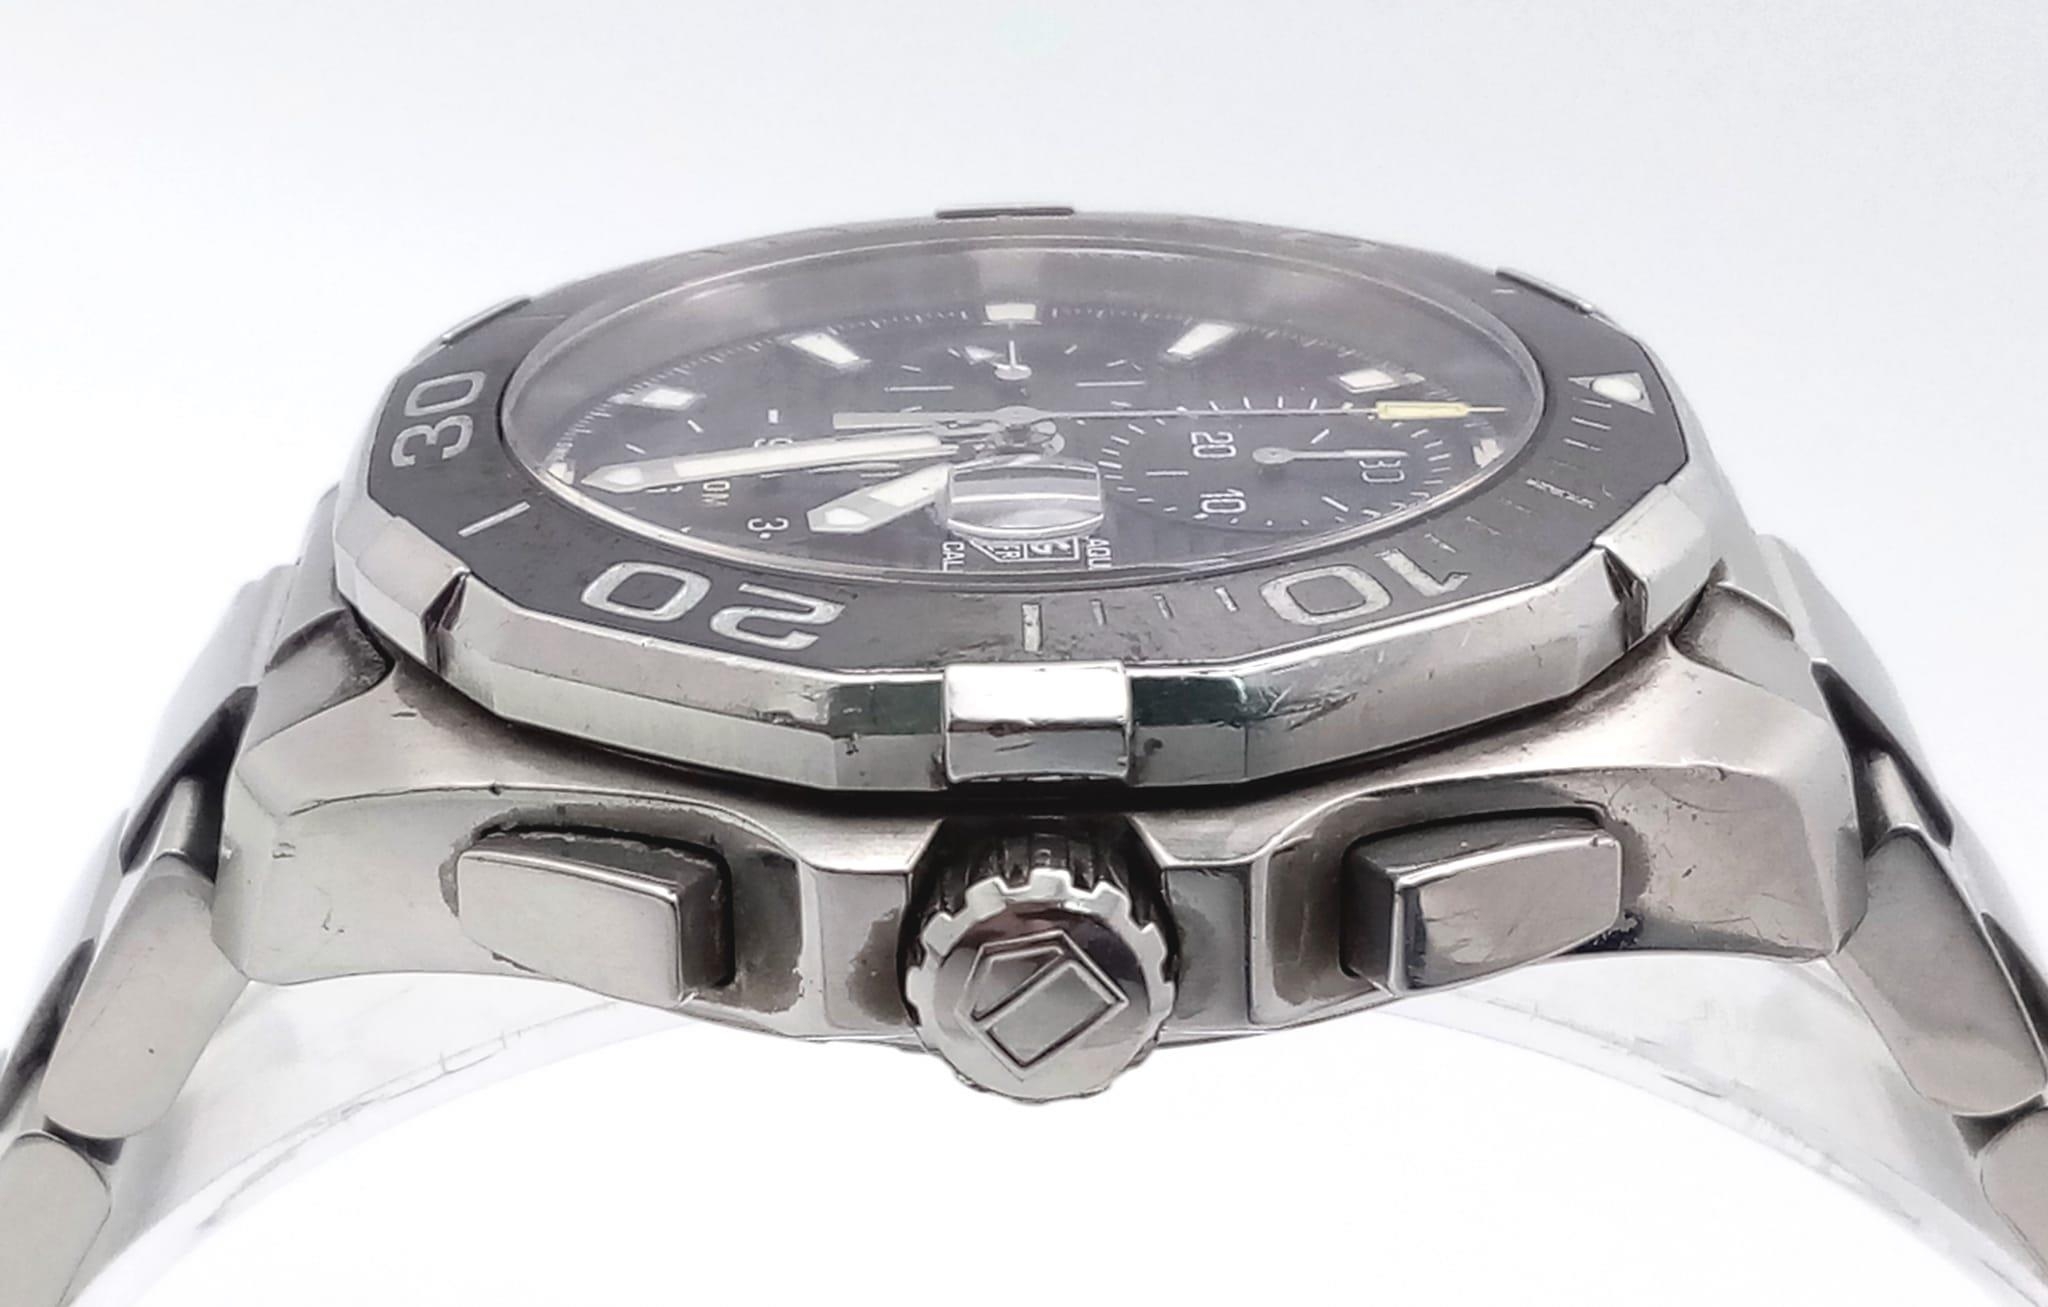 A Tag Heuer Automatic Aquaracer Gents Watch. Stainless steel bracelet and case - 44mm. Black dial - Image 4 of 8